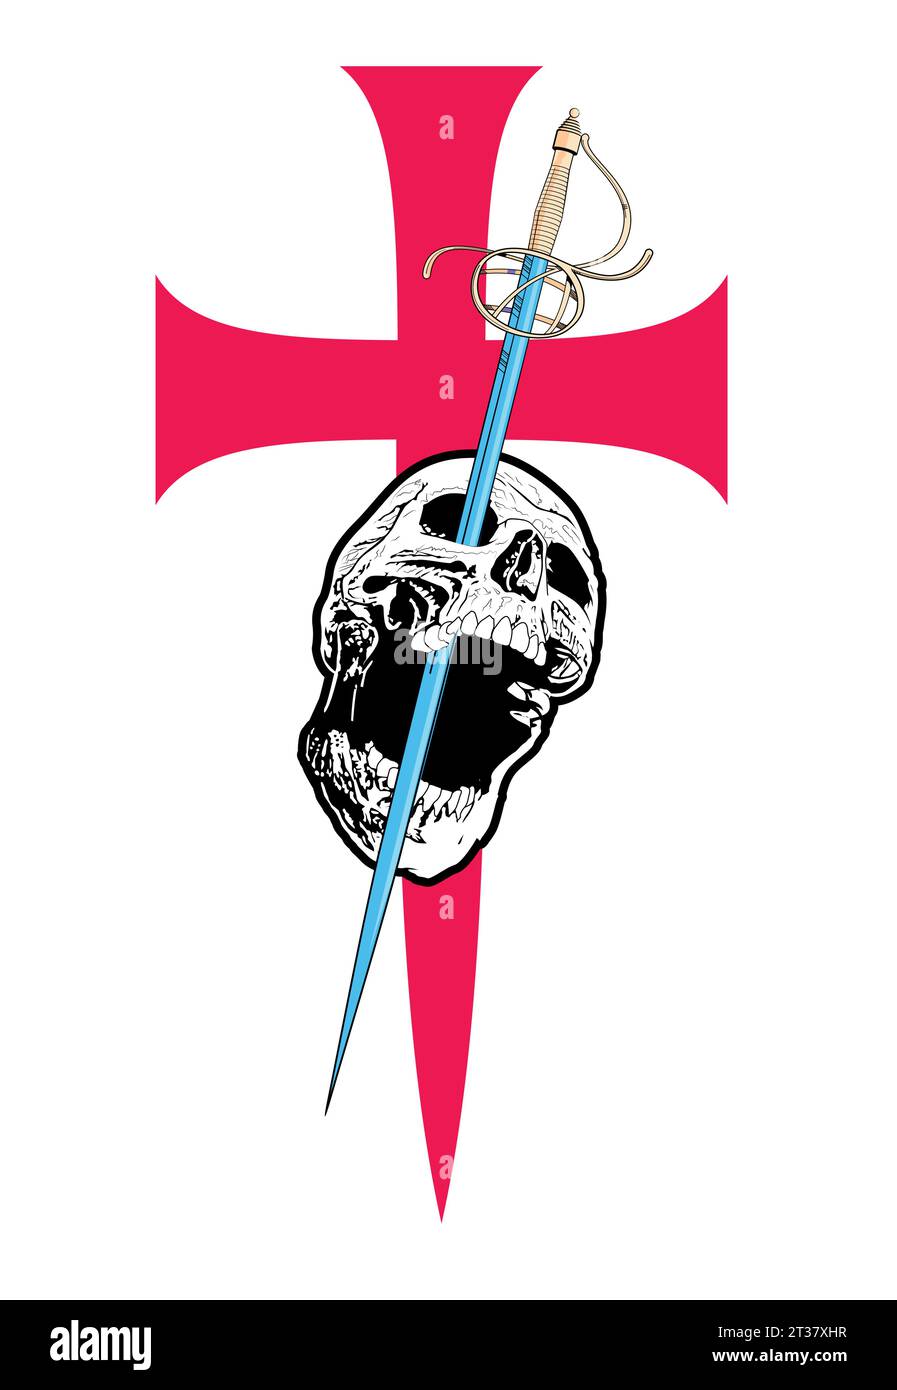 T-shirt design with a skull crossed by a sword on a large medieval cross. Stock Vector